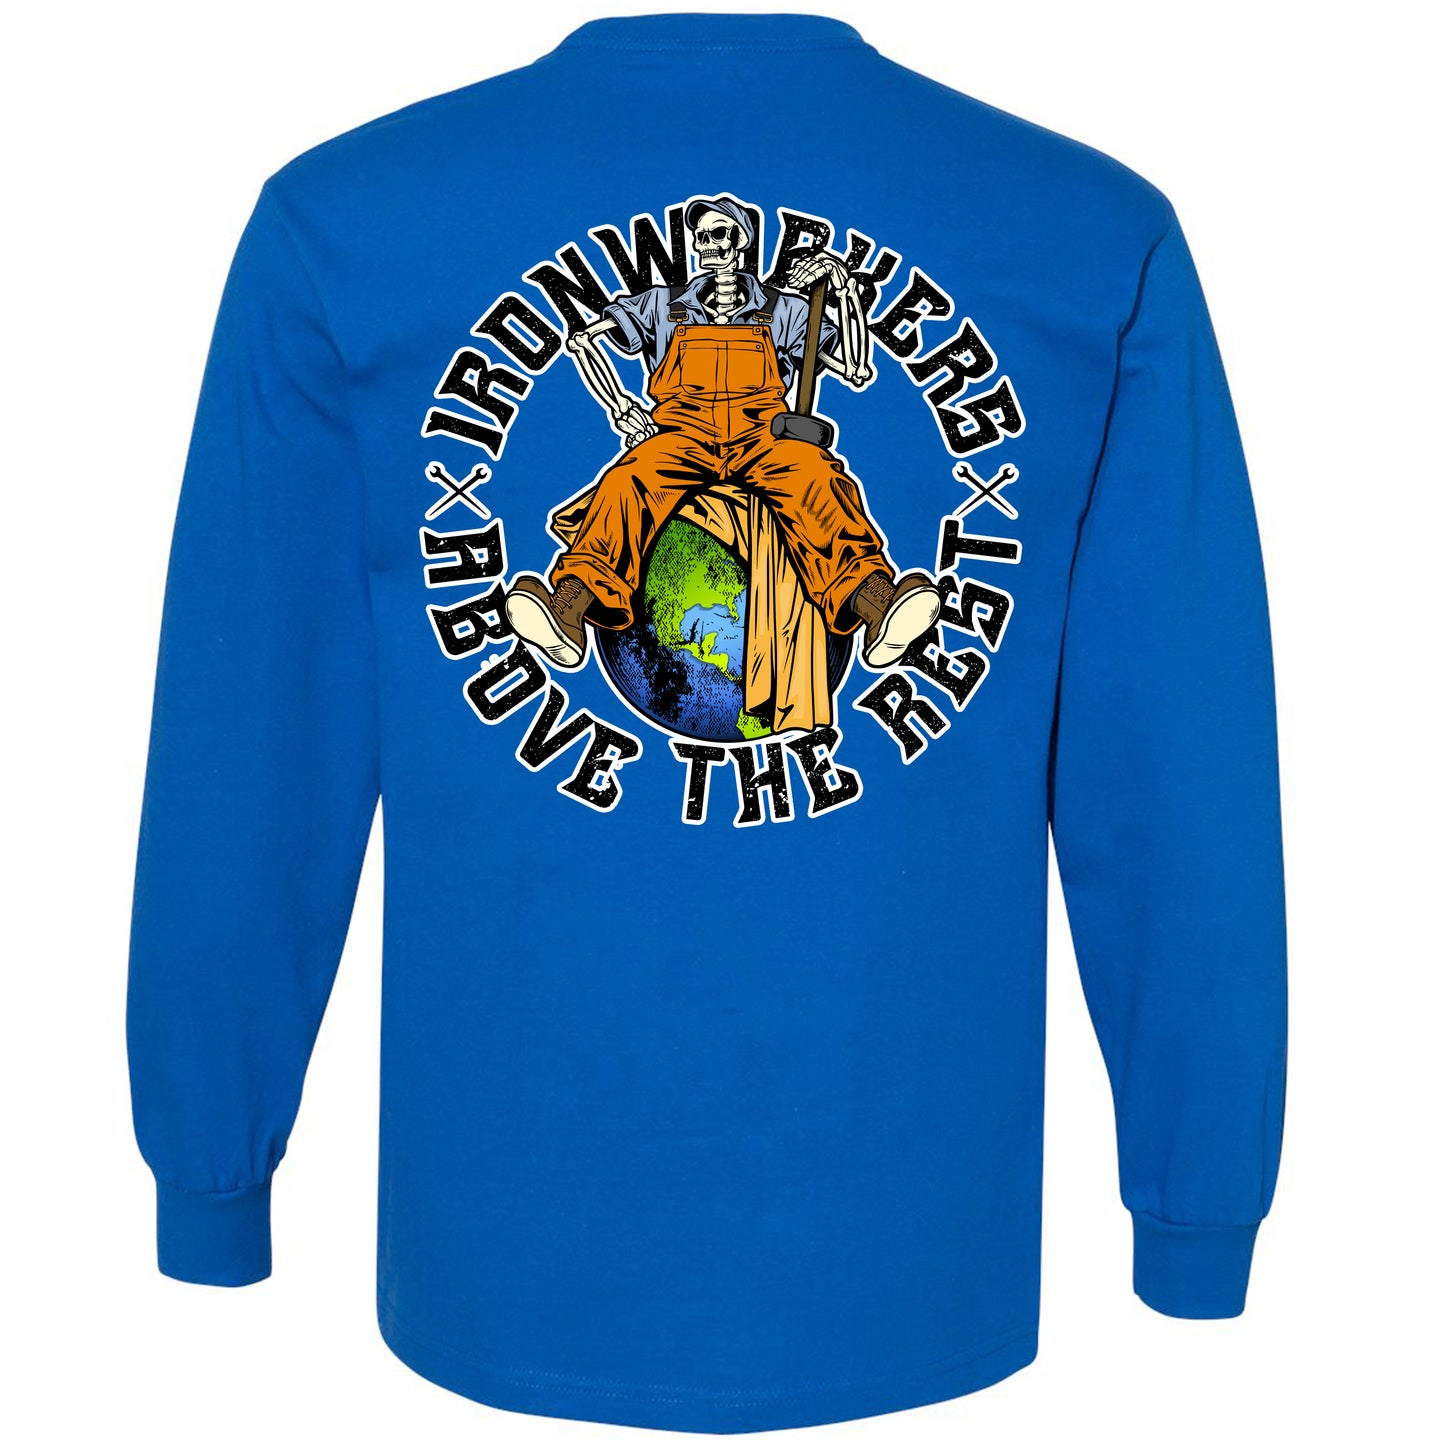 ABOVE THE REST LONG SLEEVE